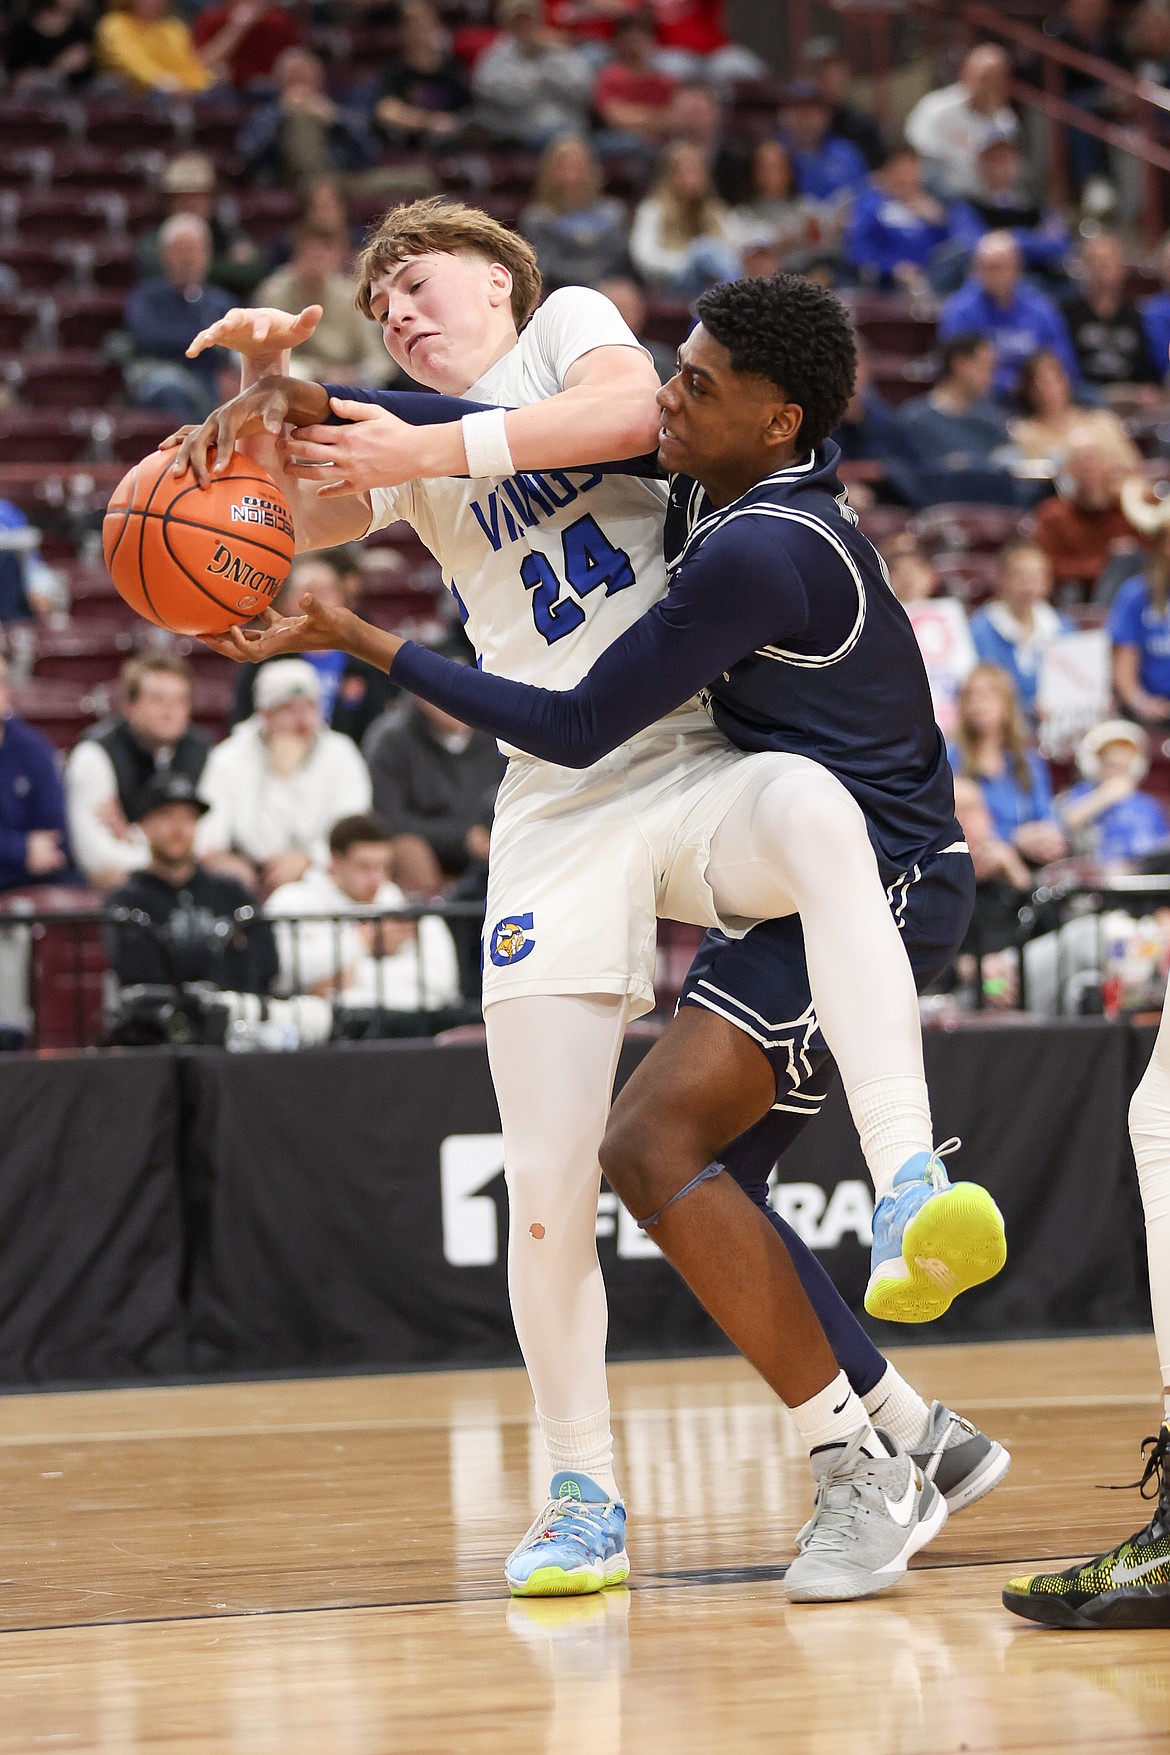 JASON DUCHOW PHOTOGRAPHY
Coeur d'Alene's Caden Symons and Lake City's Josh Watson get tangled up for a loose ball during Thursday's state 5A boys basketball tournament opening round game at the Ford Idaho Center in Nampa.